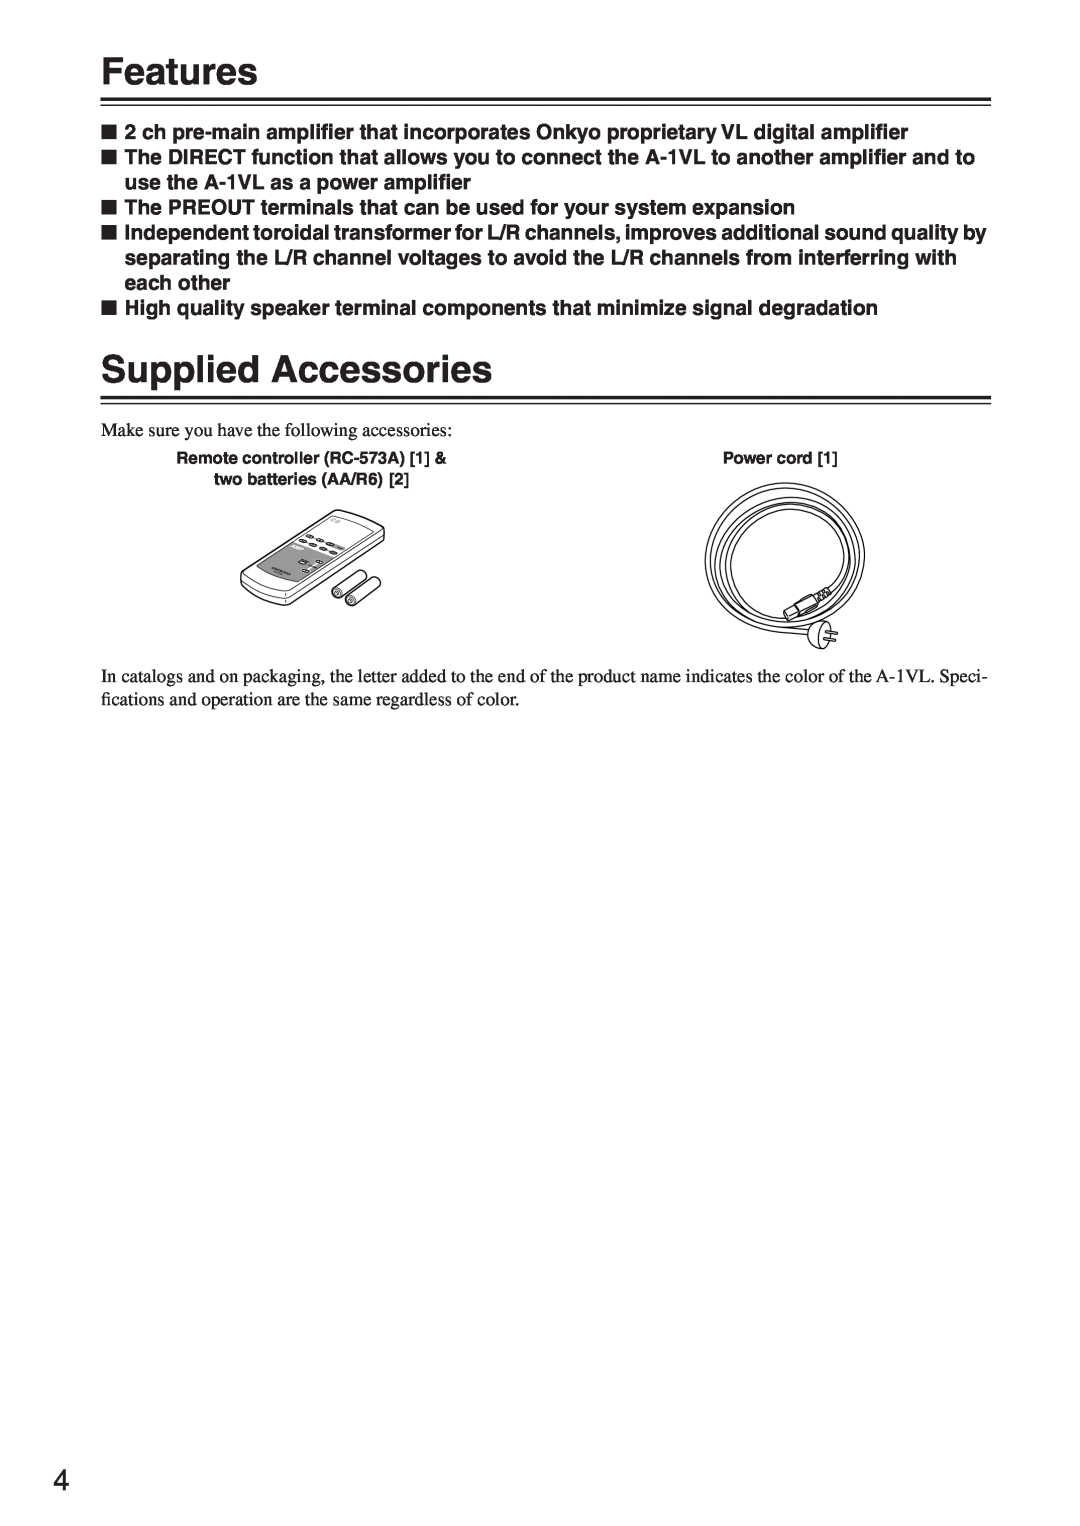 Onkyo A-1VL instruction manual Features, Supplied Accessories, Make sure you have the following accessories 